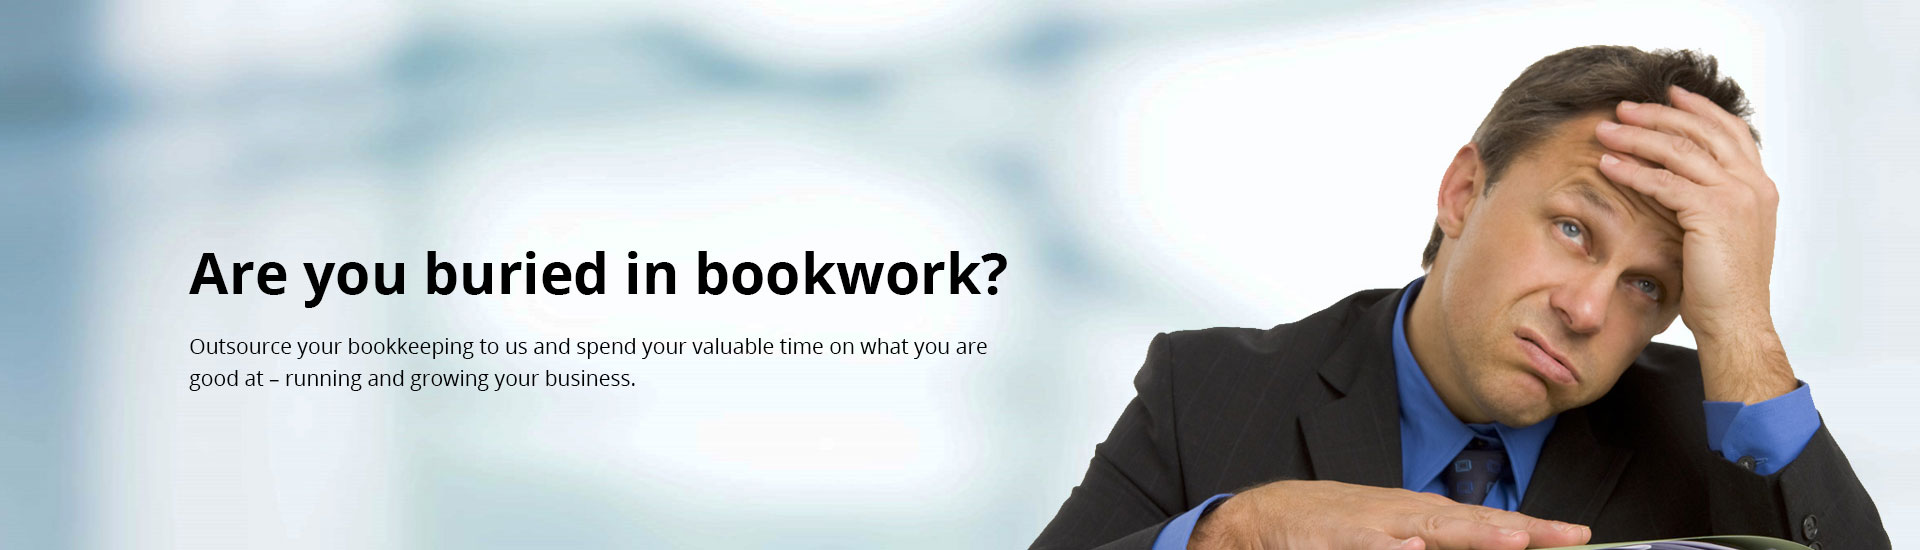 Are you buried in bookwork? Outsource your bookkeeping to us and spend your valuable time on what your are good at - running and growing your business